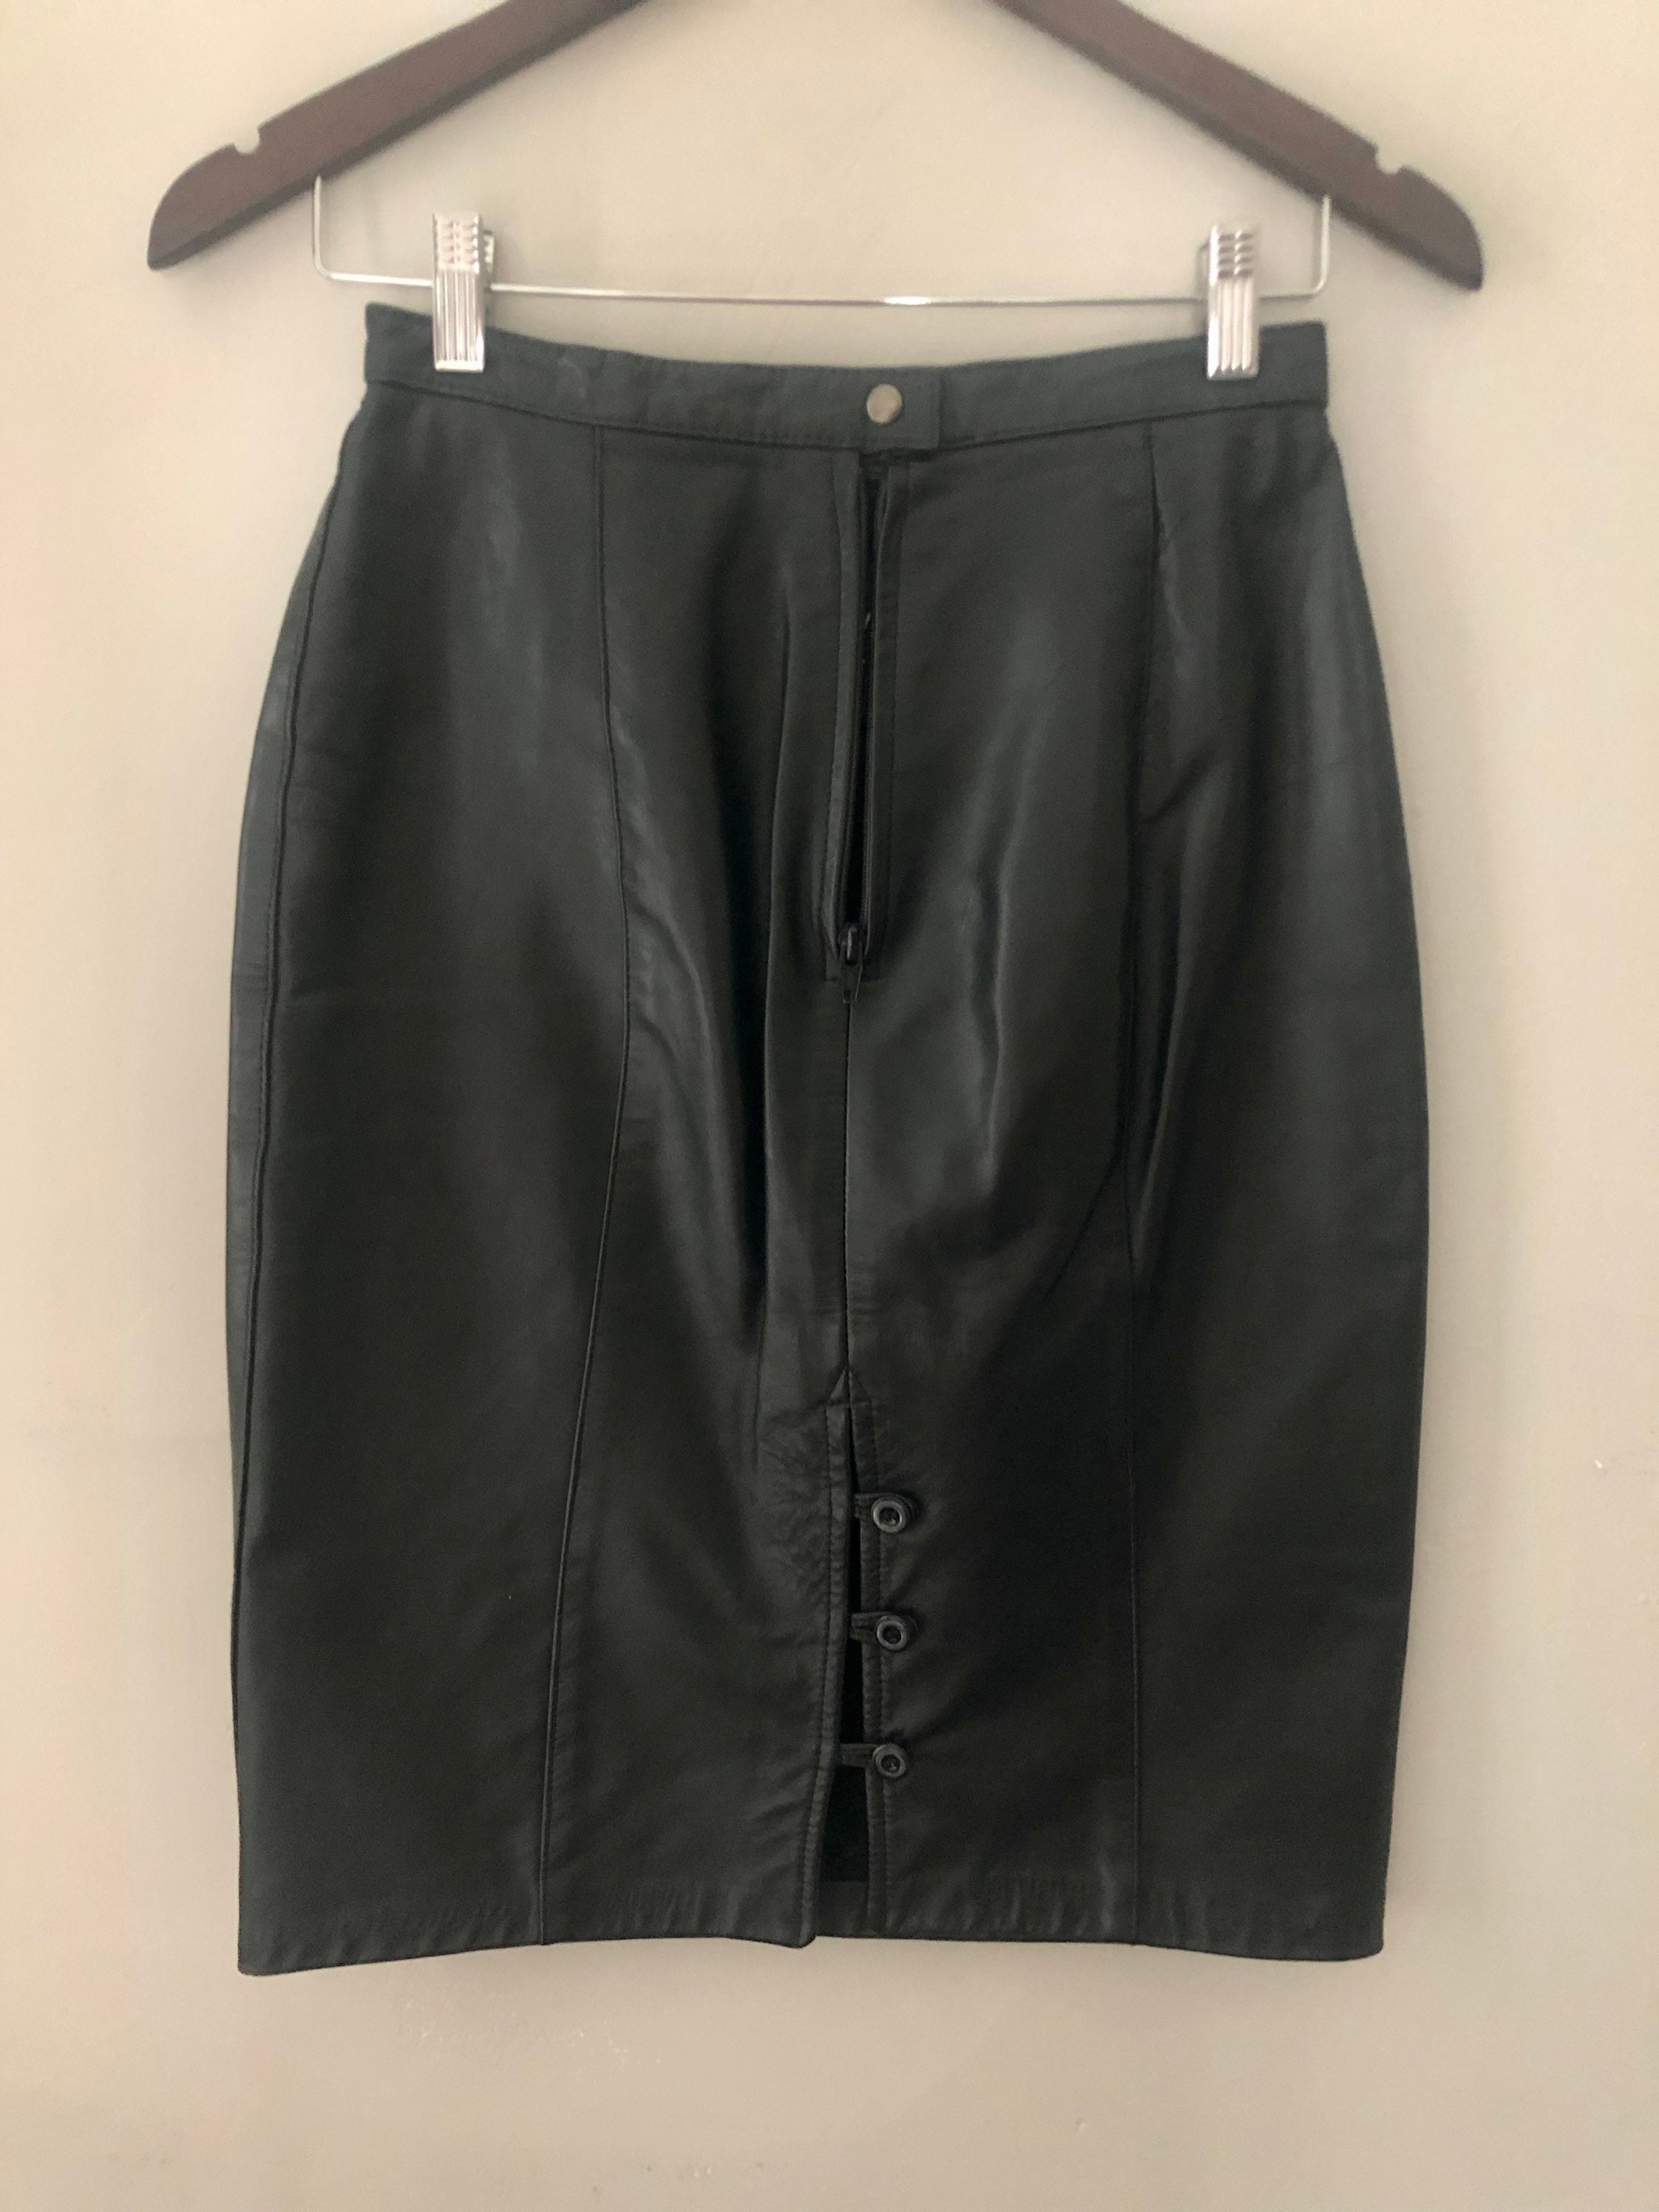 Iconic Leather Pencil Skirt - Etsy